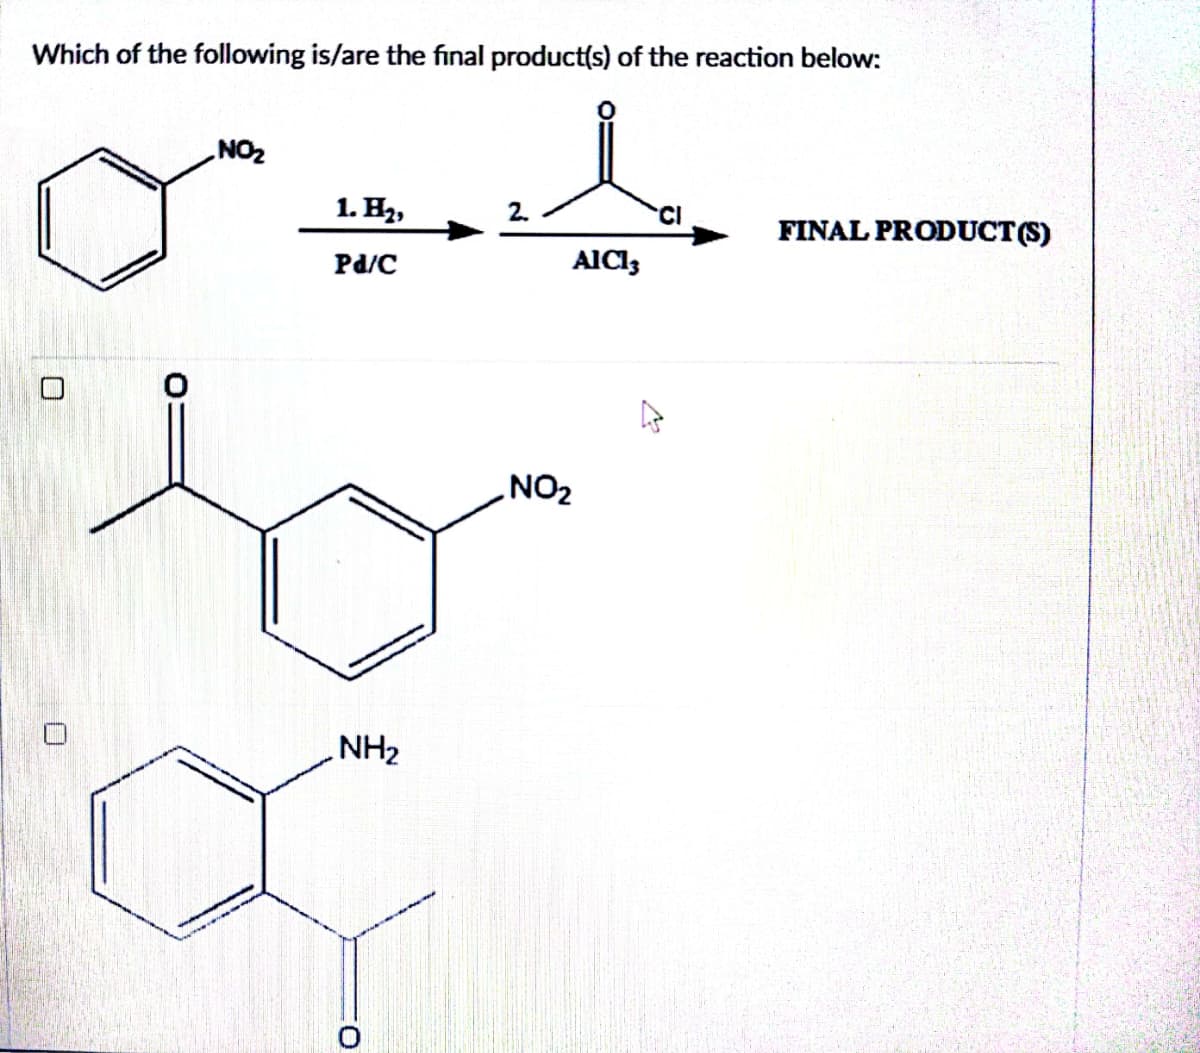 Which of the following is/are the final product(s) of the reaction below:
U
NO₂
1. H₂,
Pd/C
NH₂
O
2.
AICI,
NO₂
FINAL PRODUCT (S)